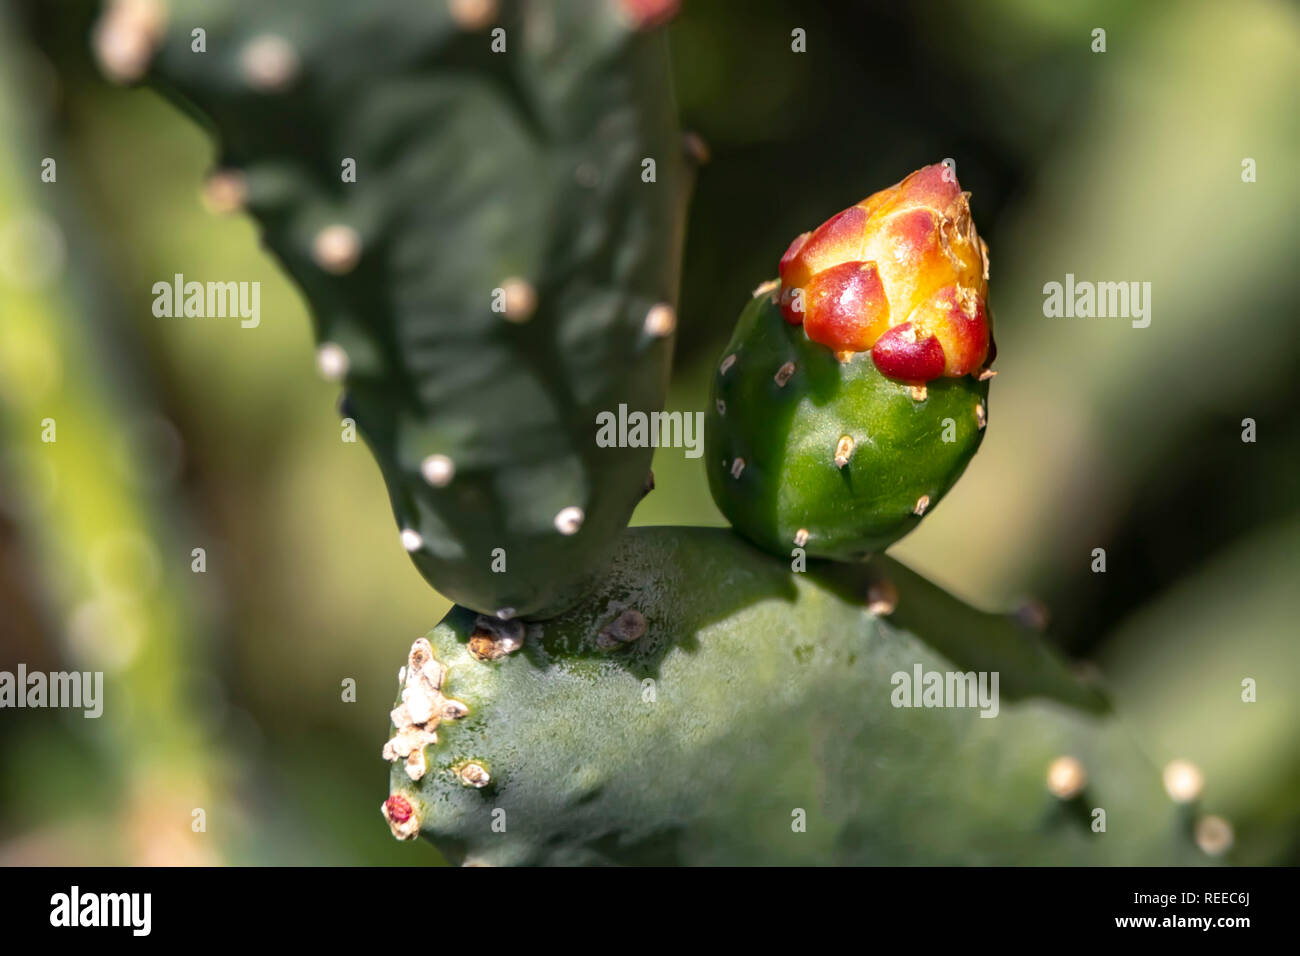 Cactus flower bud on a blurred background close-up Stock Photo